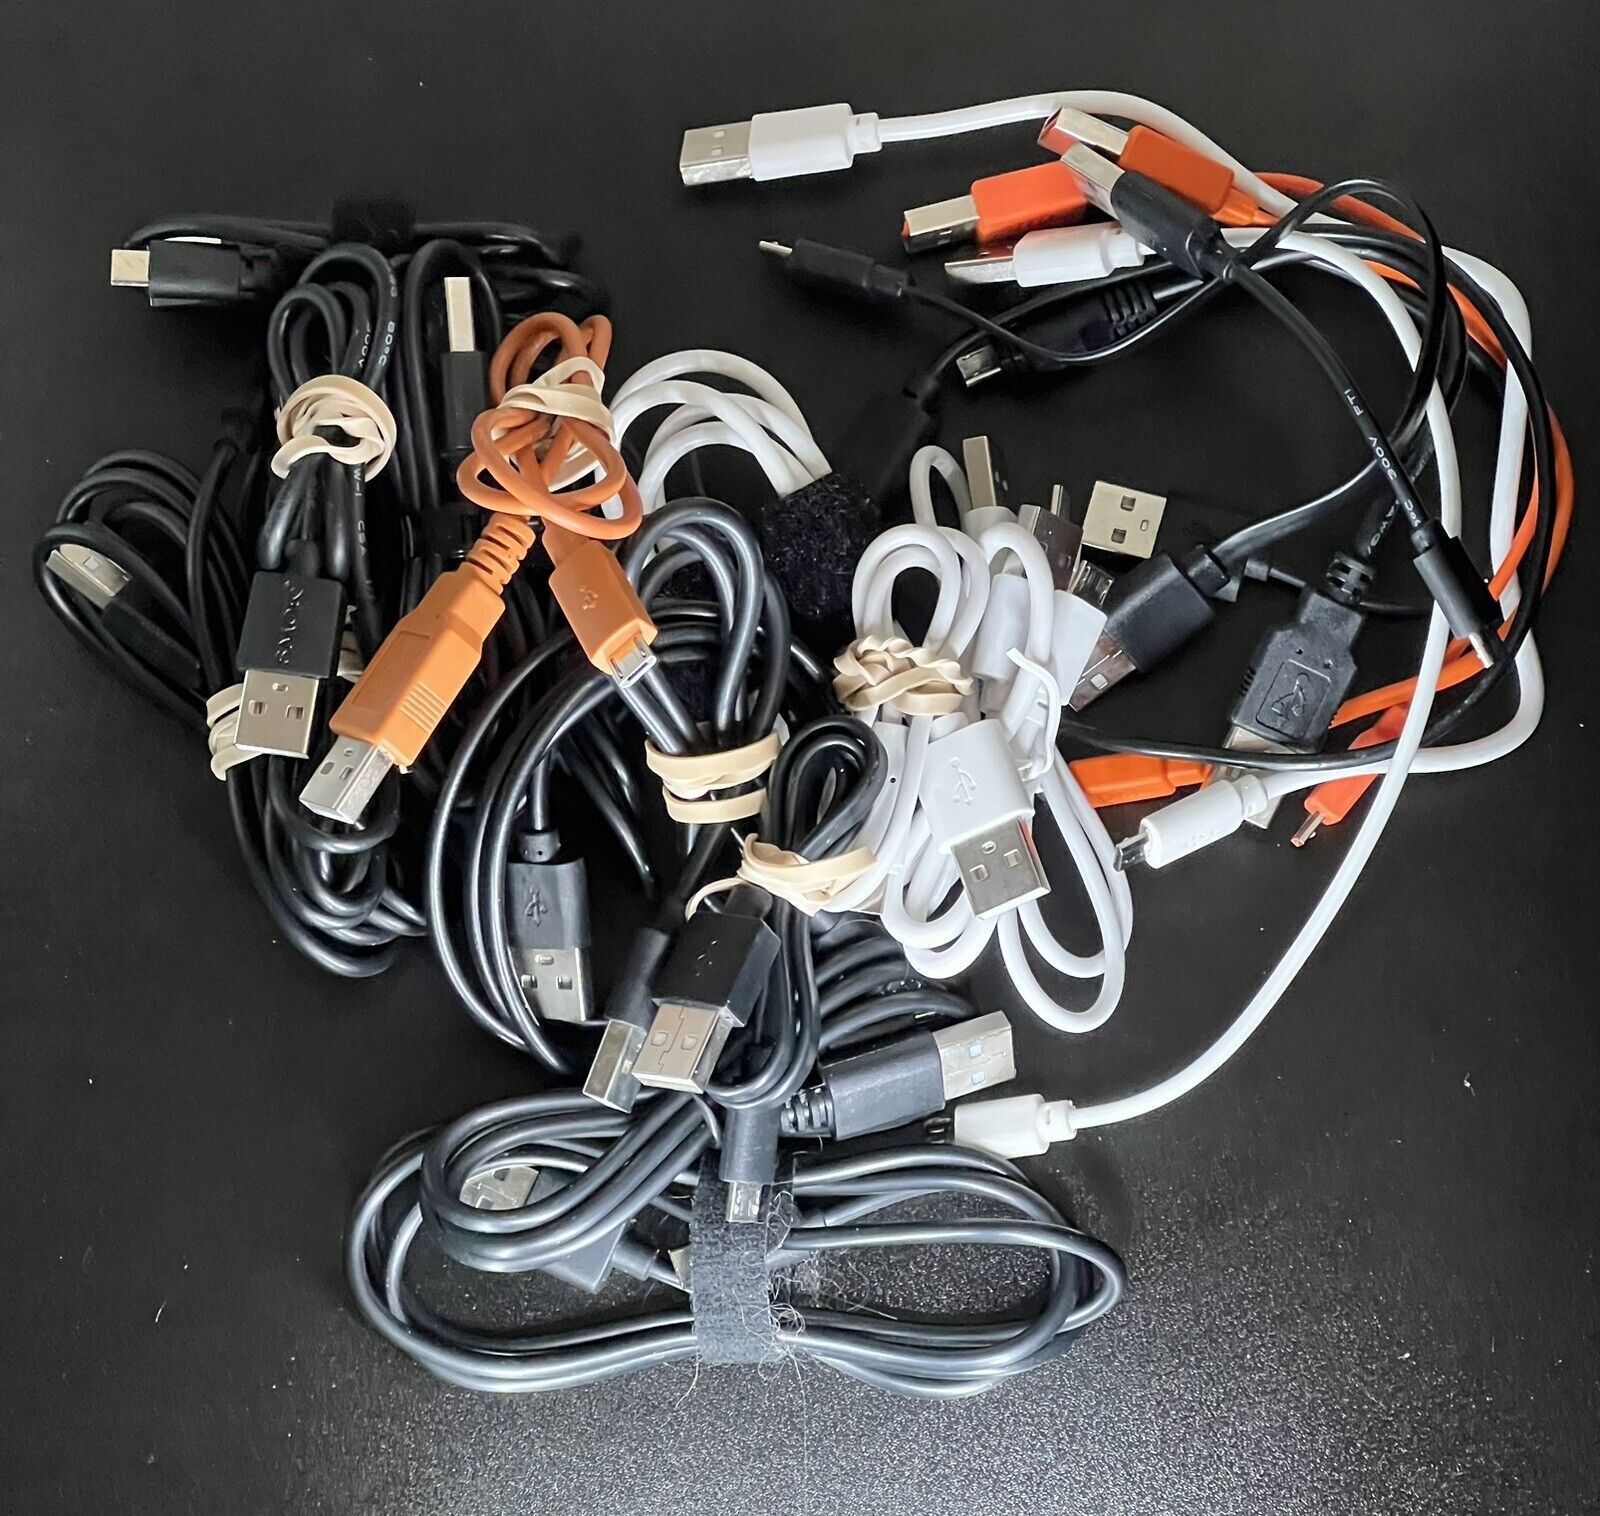 Lot of 38 USB Cables - A to B, Micro, USB C etc..